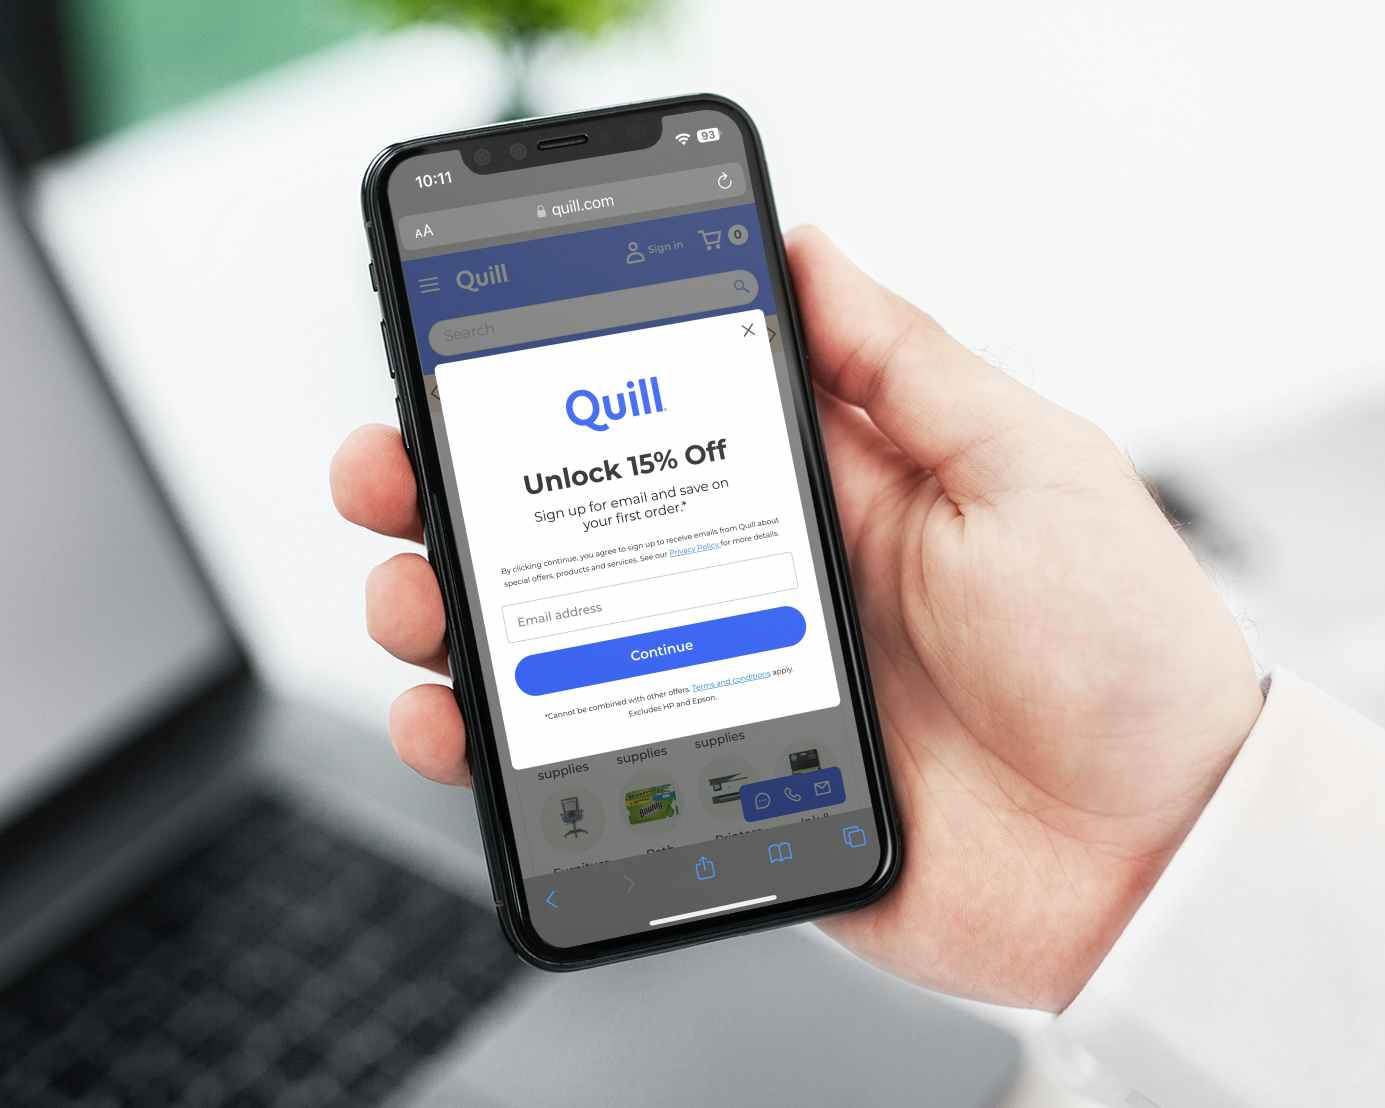 A person holding a phone displaying the email sign up offer for 15% off on Quill.com